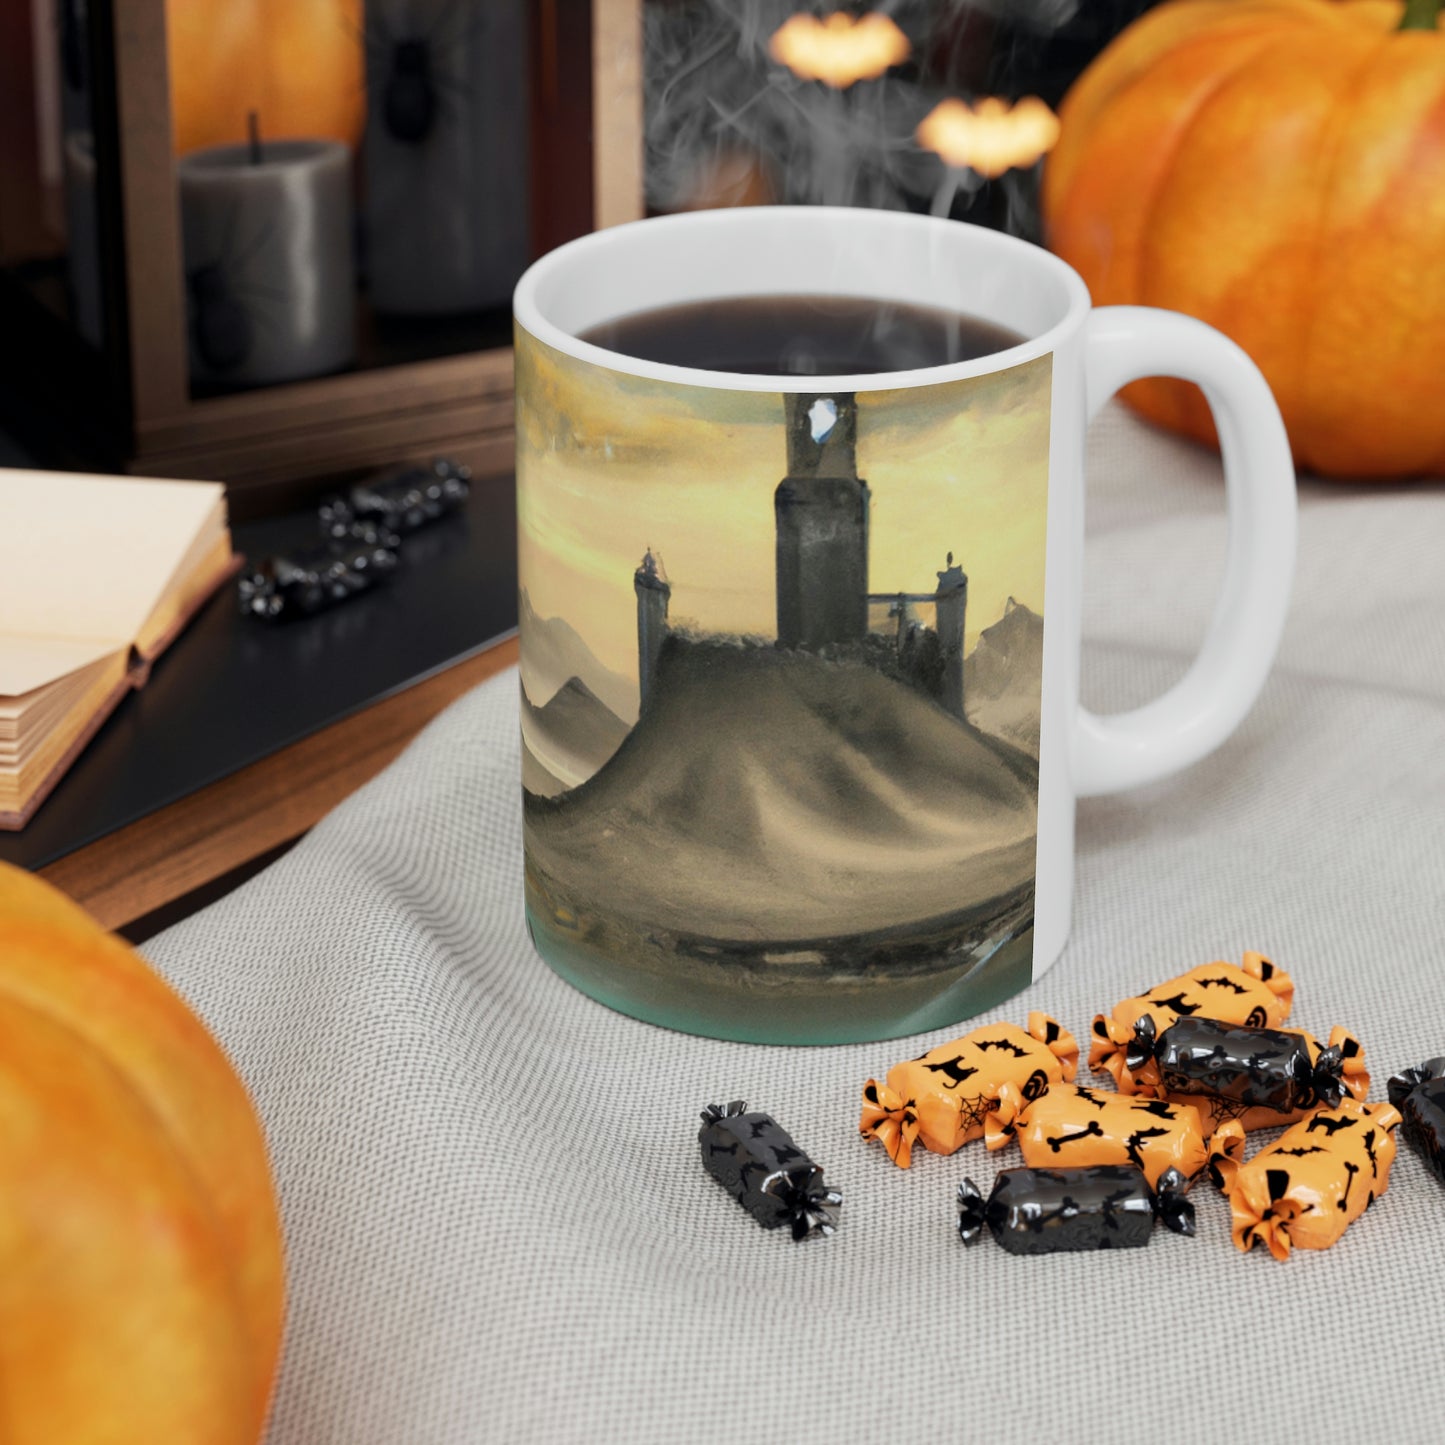 The Knight and the Dragon's Throne - The Alien Ceramic Mug 11 oz